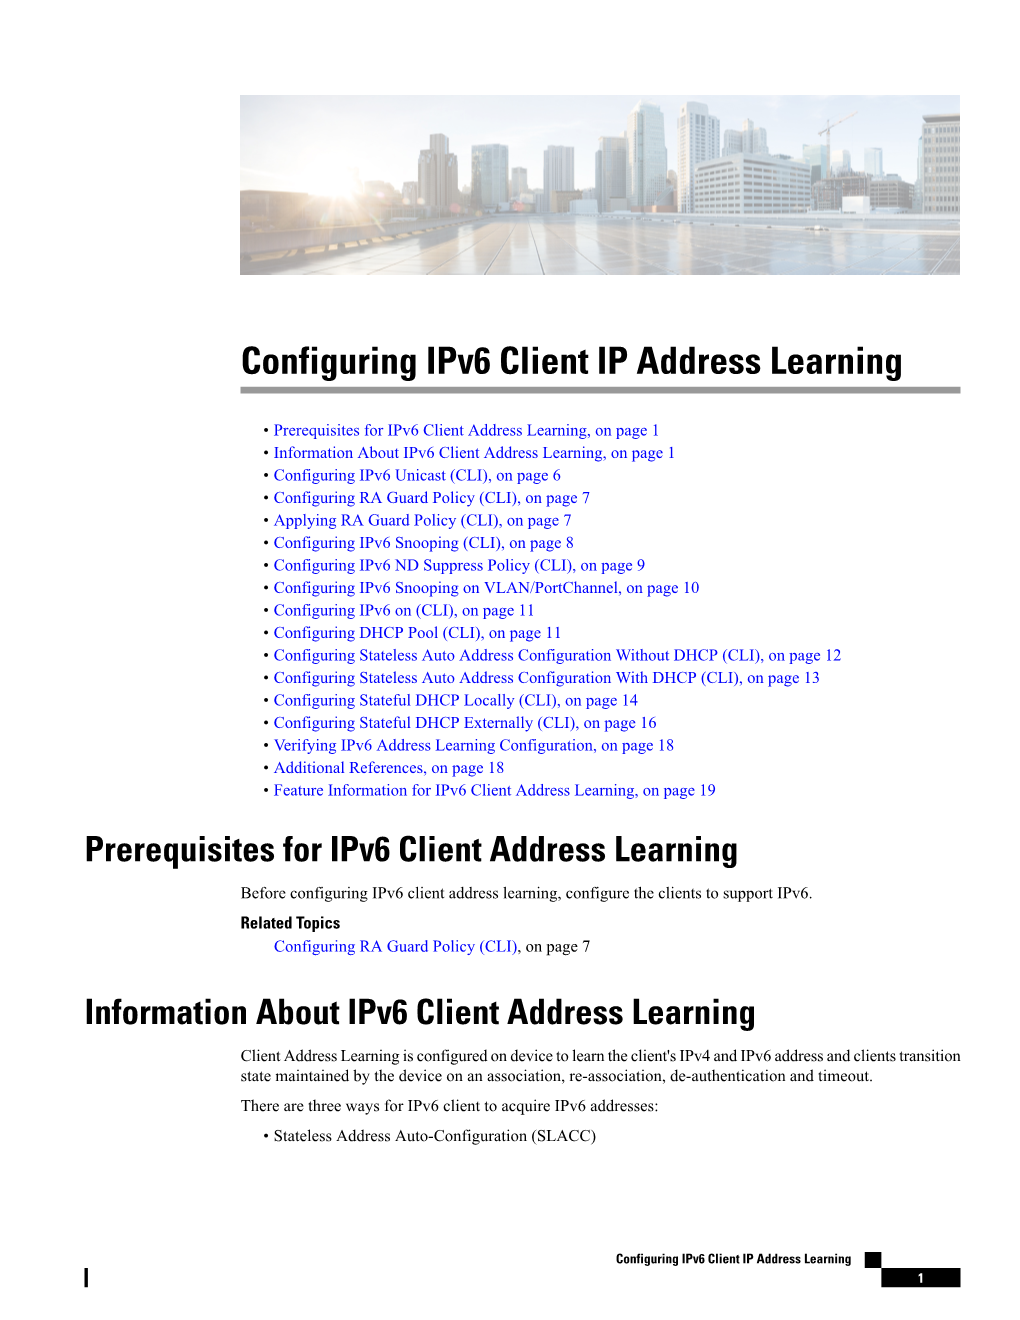 Configuring Ipv6 Client IP Address Learning